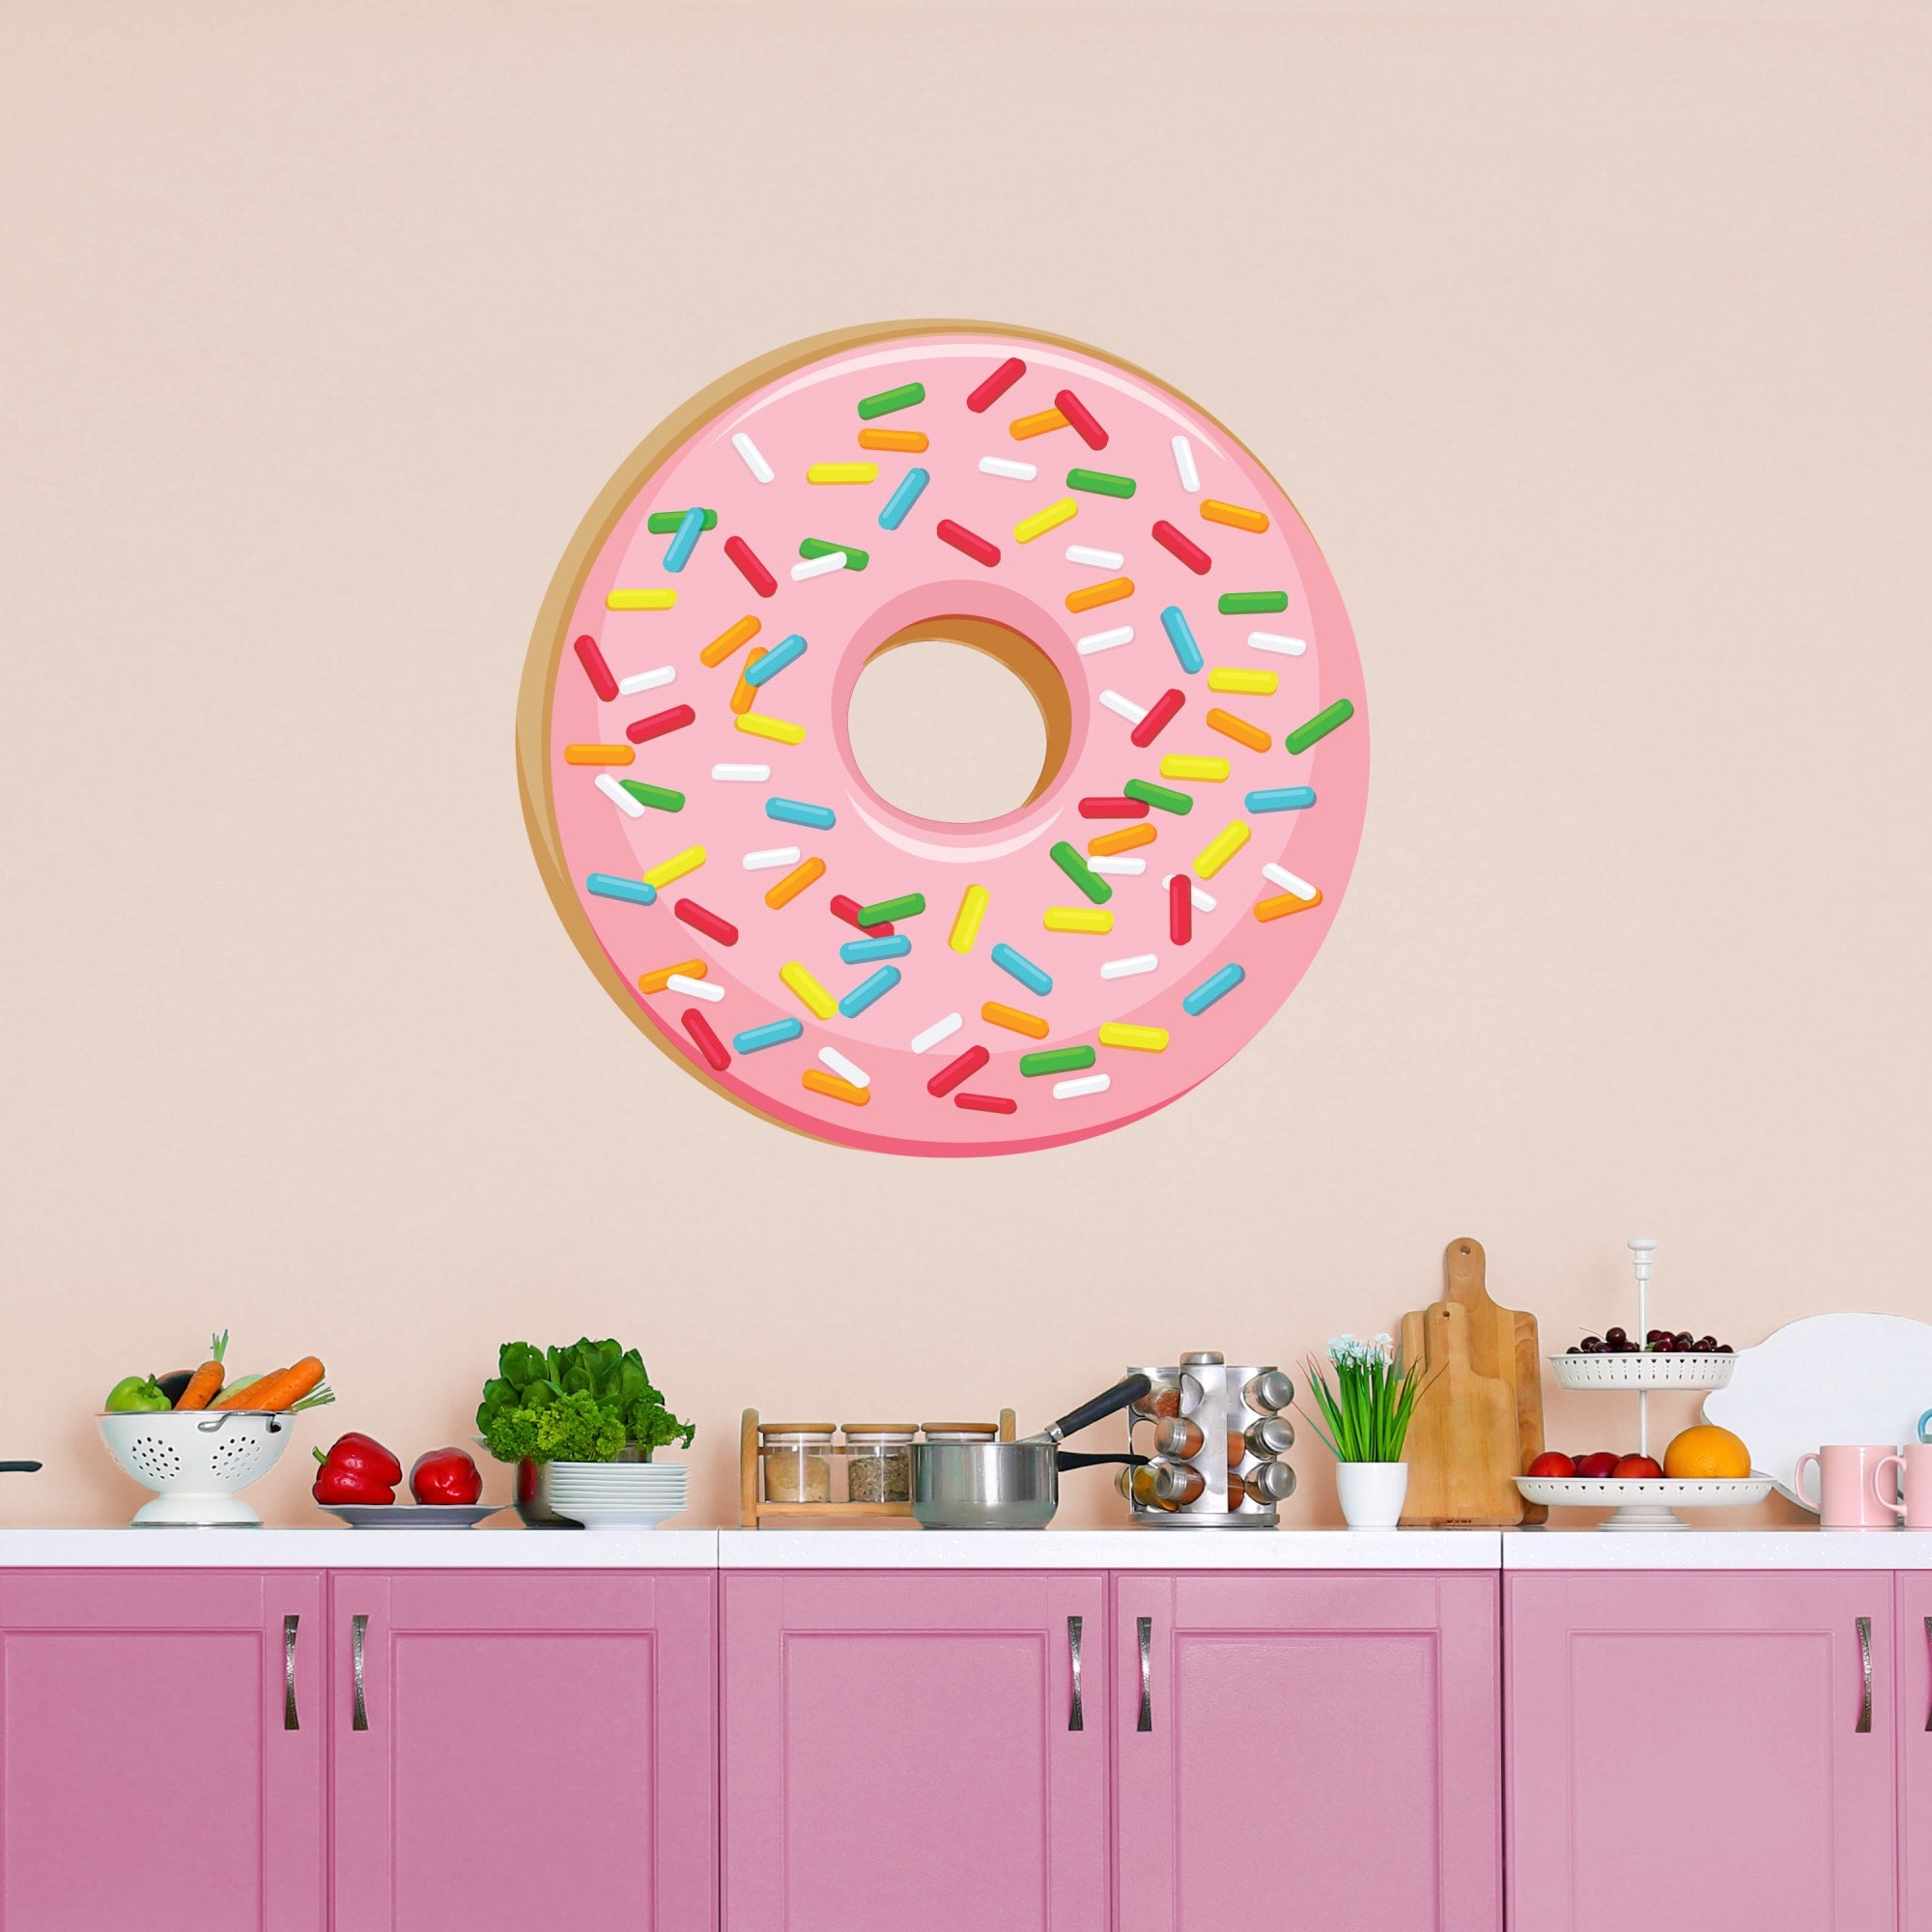 Donut: Illustrated - Removable Vinyl Decal Giant Donut + 2 Decals (37"W x 37"H) by Fathead